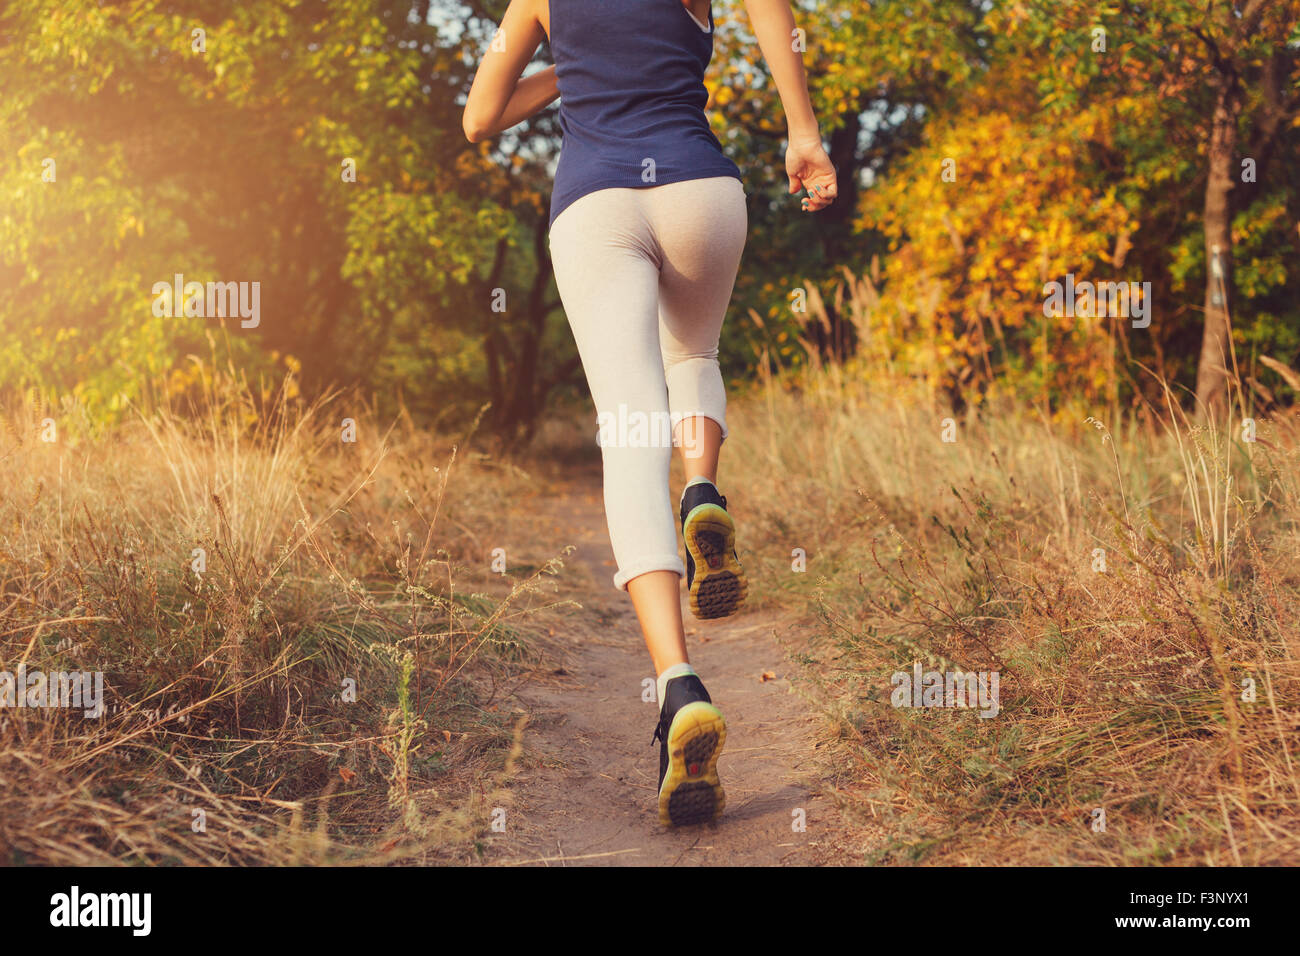 Young woman running on a rural road at sunset in autumn forest. Lifestyle sports background Stock Photo